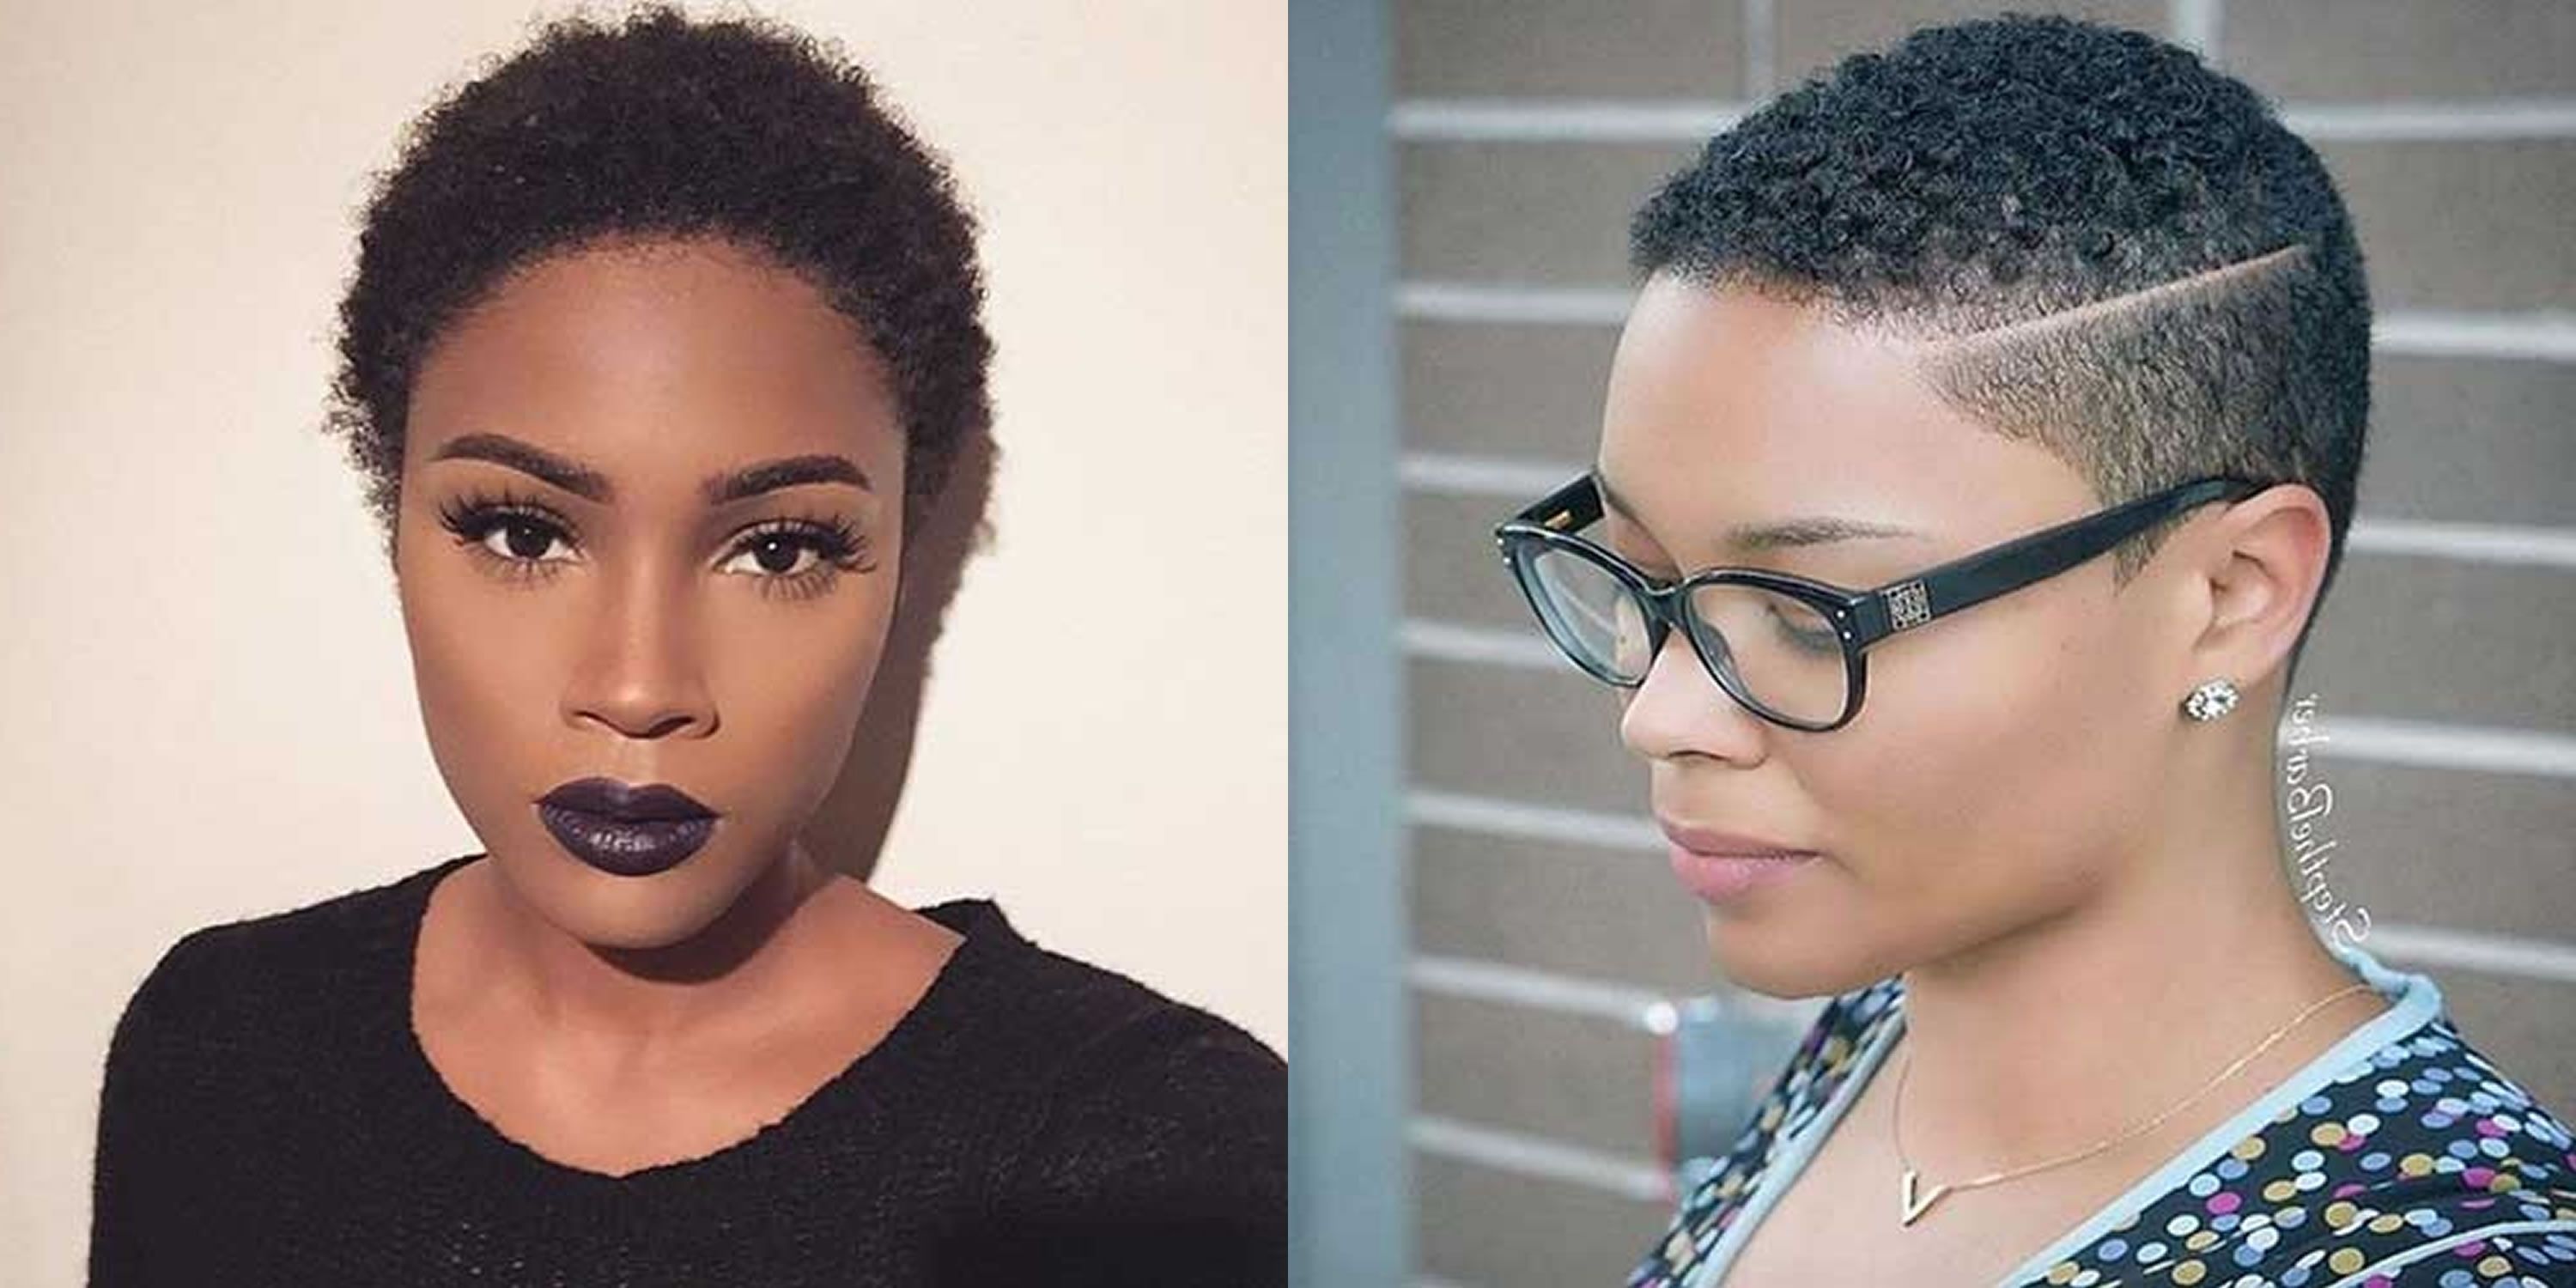 Hairstyles ~ Pixie Hairstyles For Black Women 60 Cool Short Intended For Most Recently Short Pixie Hairstyles For Black Women (Photo 1 of 15)